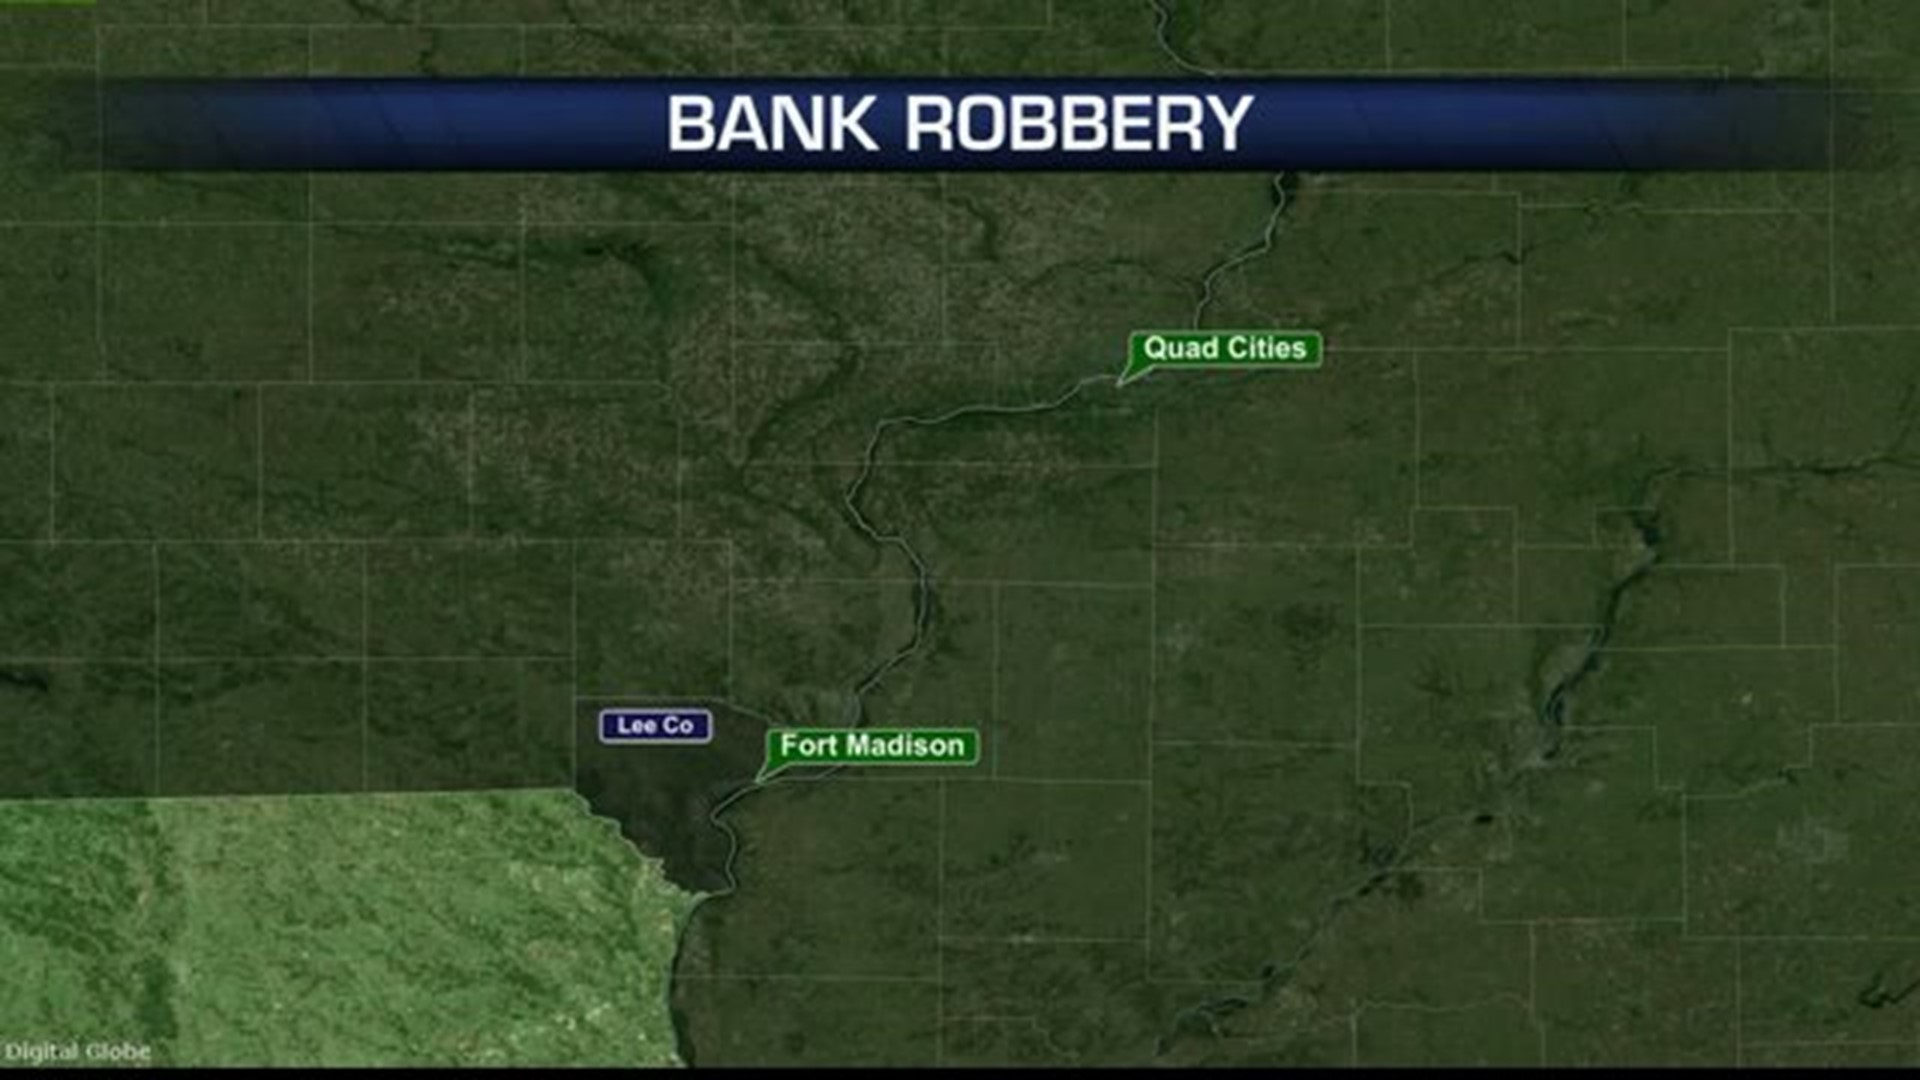 Bank robbery suspect killed in shootout with police